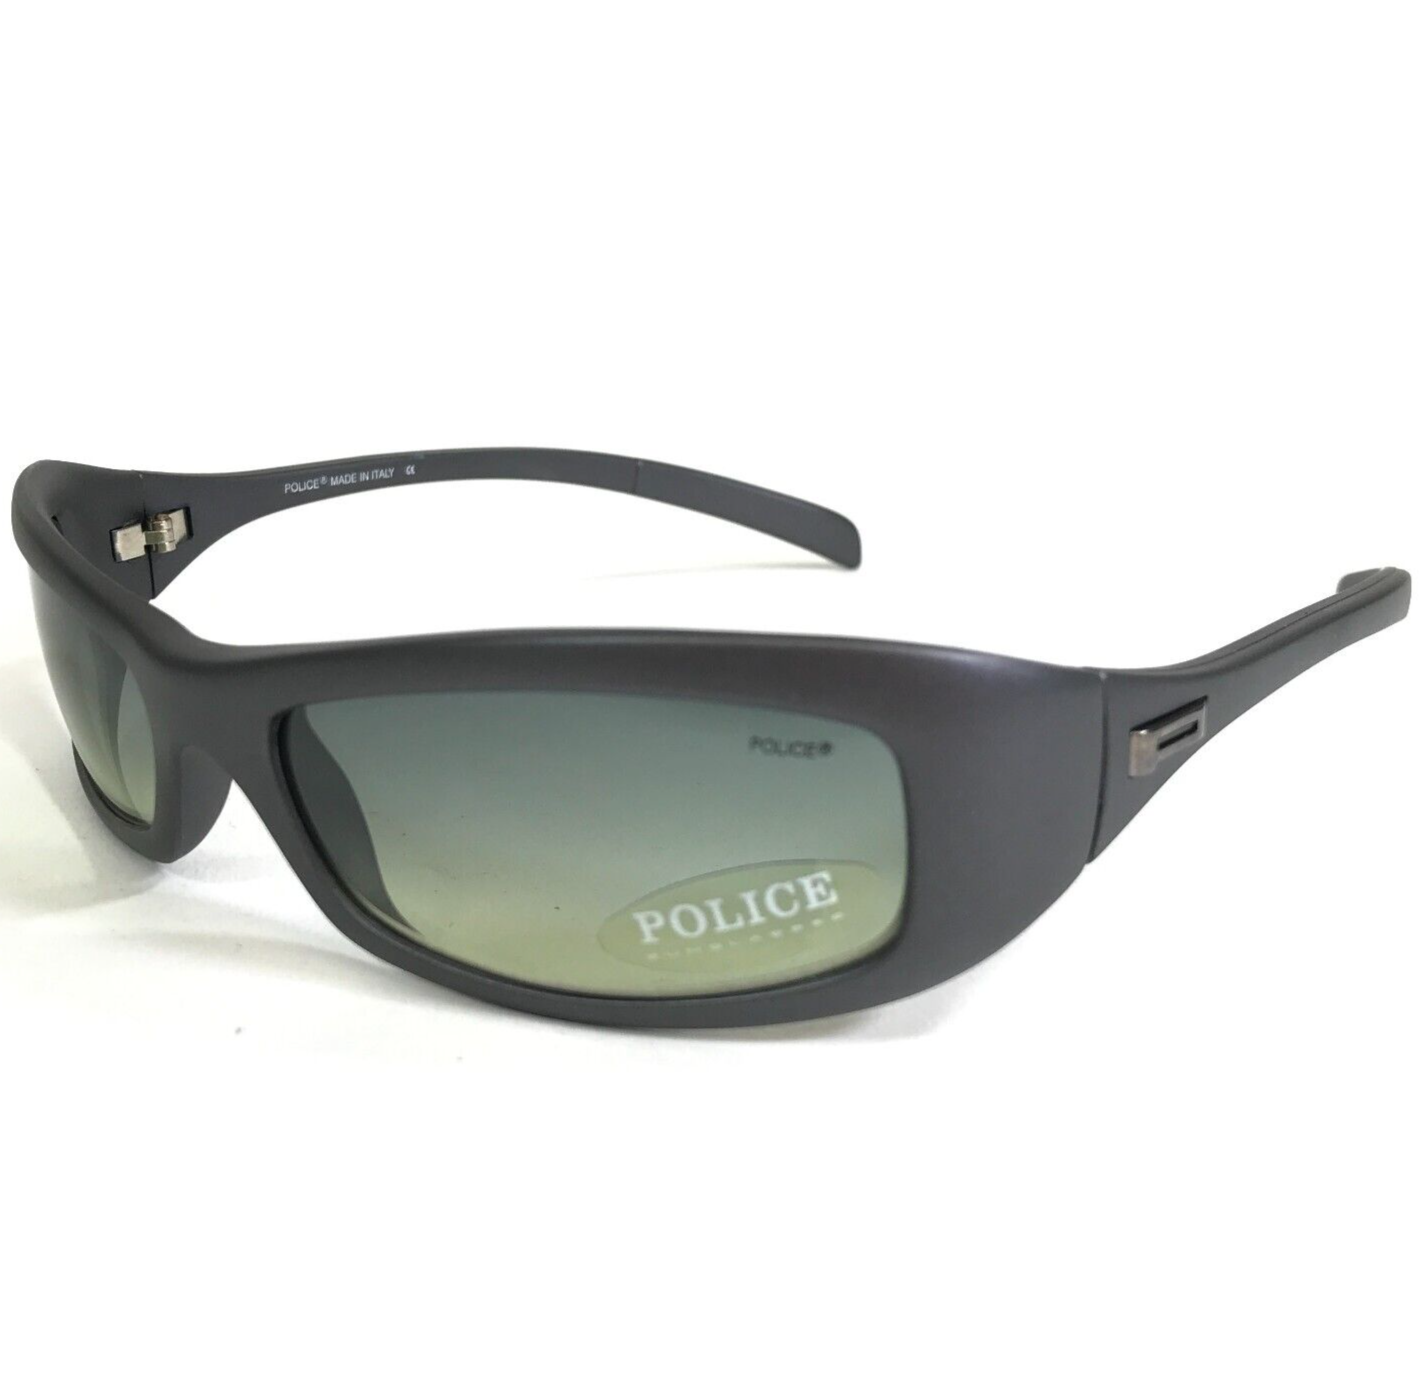 Primary image for Police Sunglasses MOD.1358 T17 Matte Gray Rectangular Frames with Green Lenses